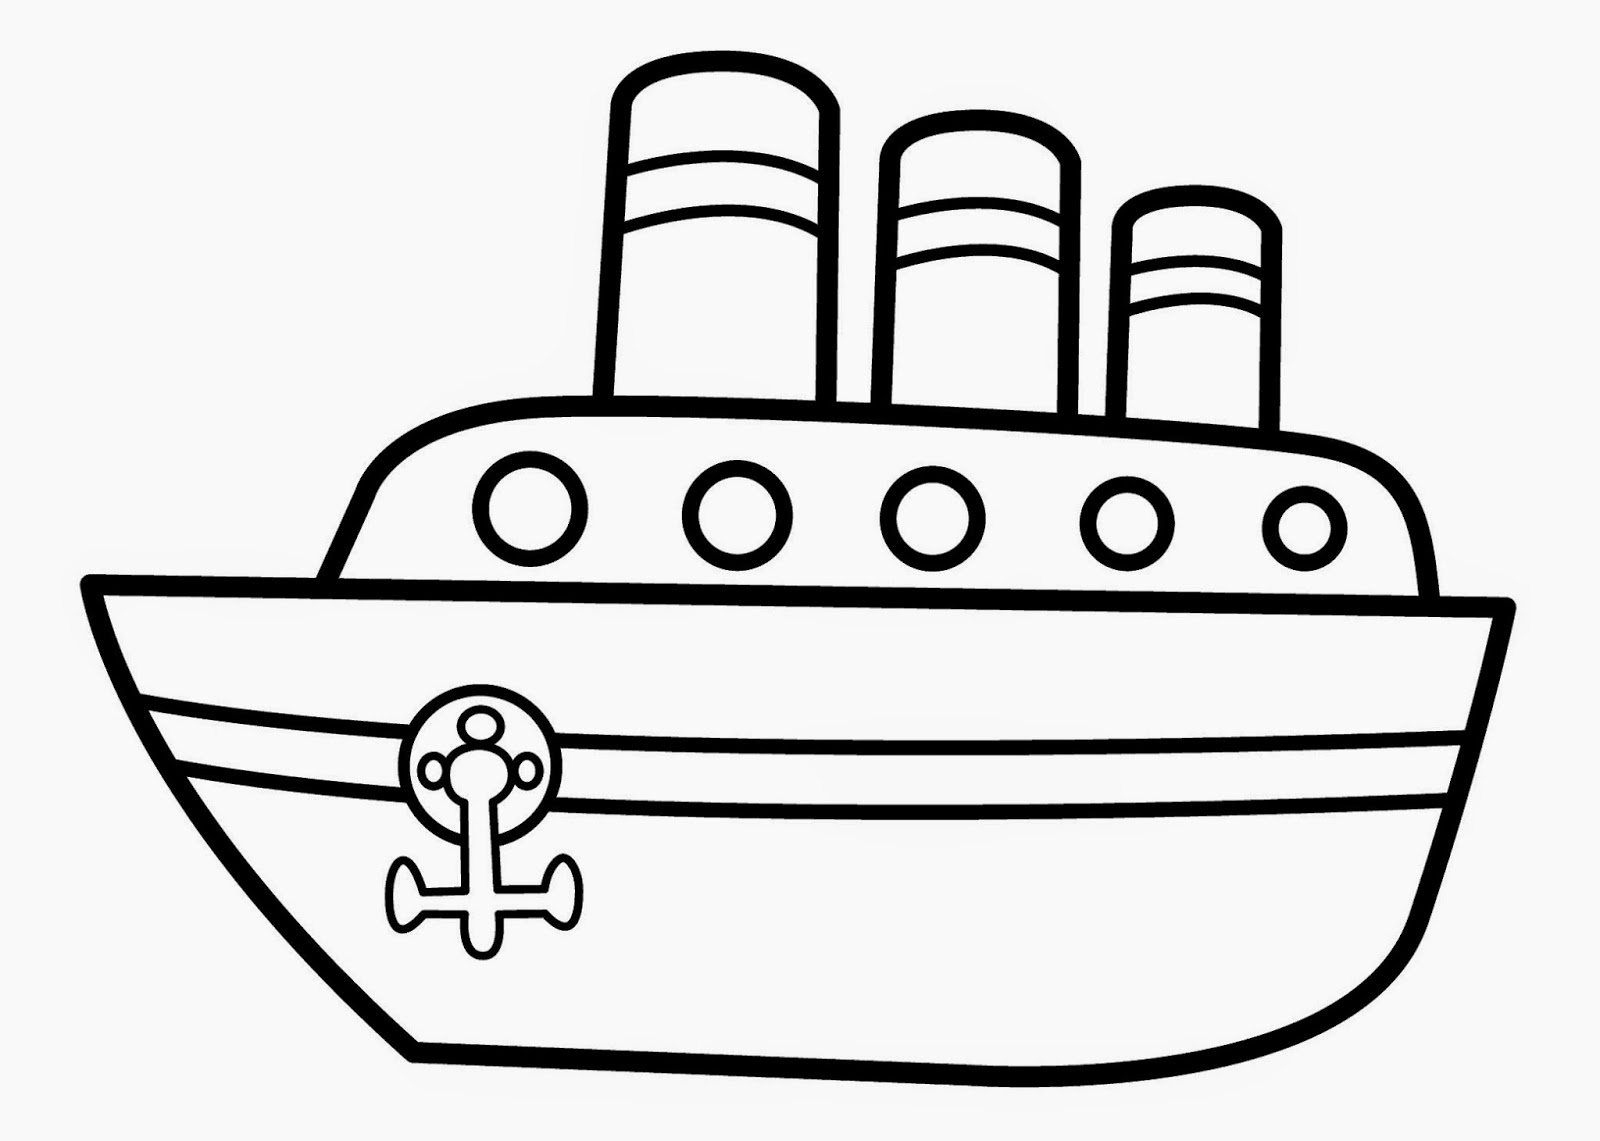 Kids Under 20 Vehicles Coloring Pages